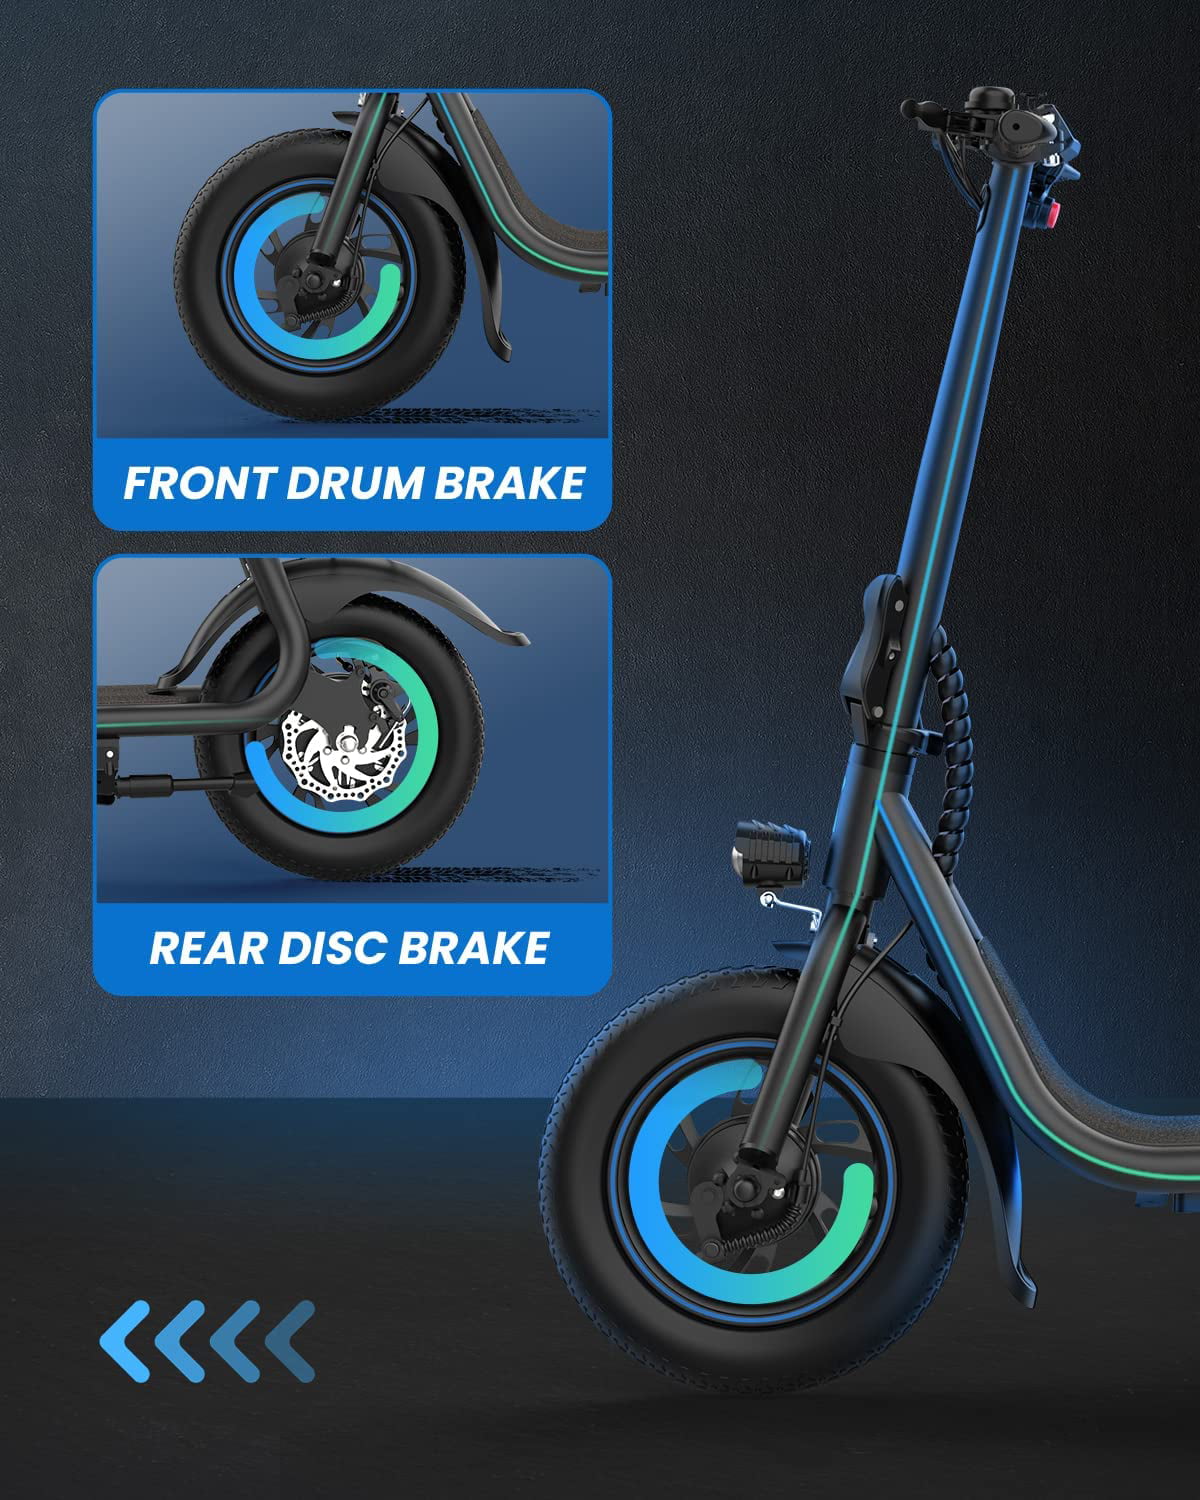 Max 22 Powerful C1 Electric with up Speed URBANMAX Adult Motor Scooter-Blackfor Range, Electric Commuting with for Folding Basket 450W Scooter Seat, 15.5Mph, to Scooter Miles Electric